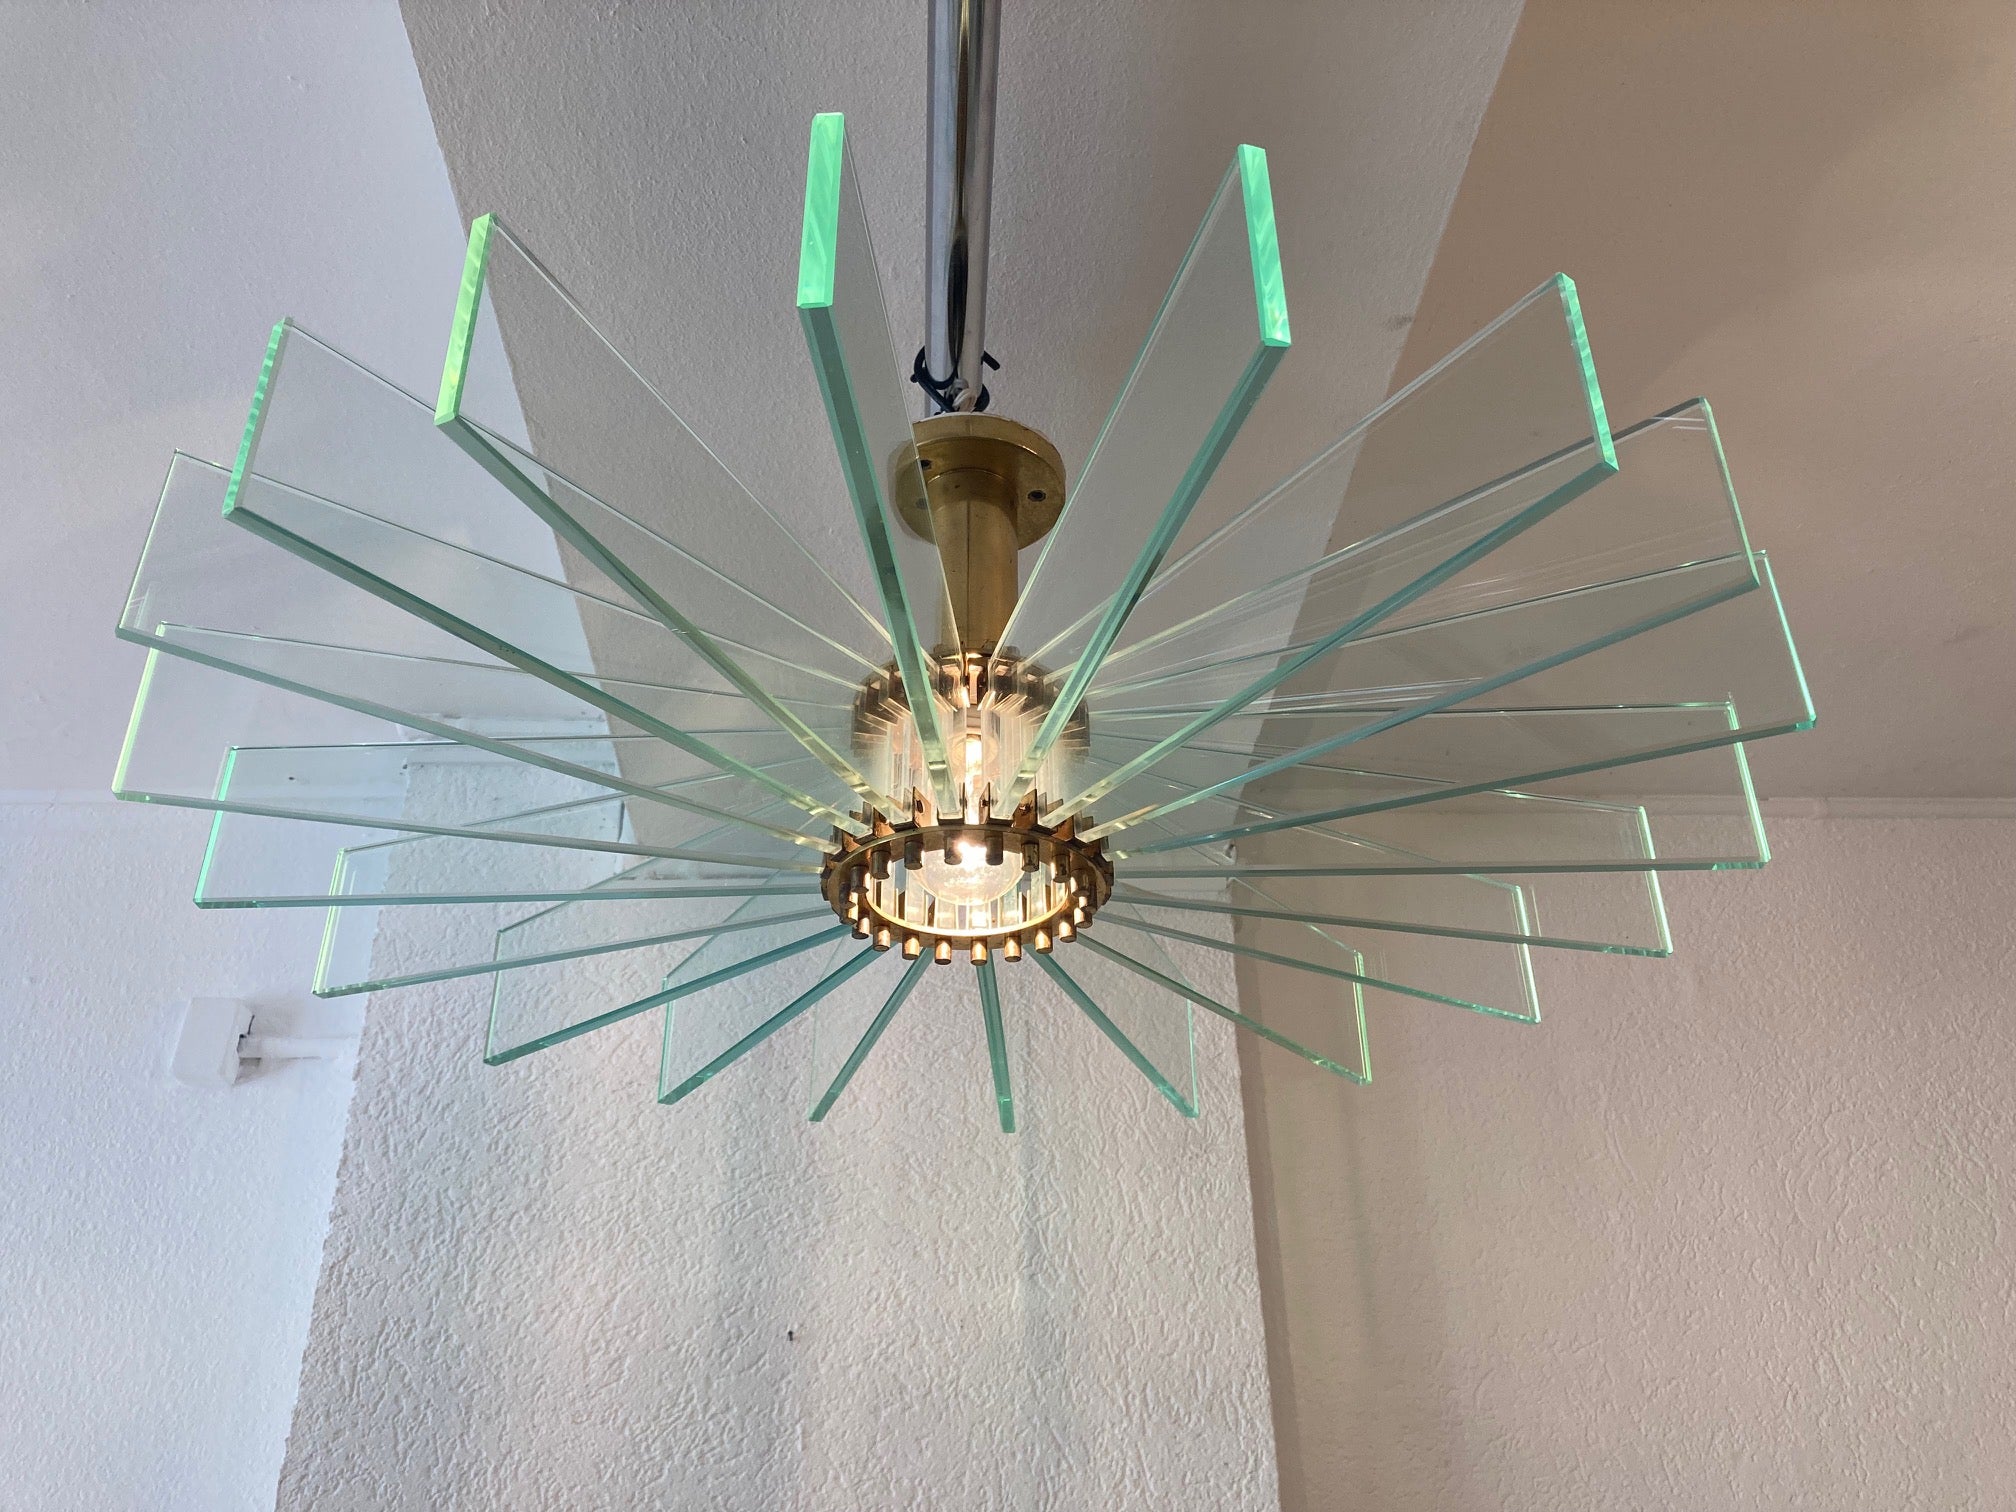 Stunning vintage brass and glass sunburst flush mount ceiling lamp probably made in Switzerland.
Comes from an hospital in Switzerland built in 1958.
Superb lighting effect, sunrays on the ceiling and green reflections on the walls
Good condition,